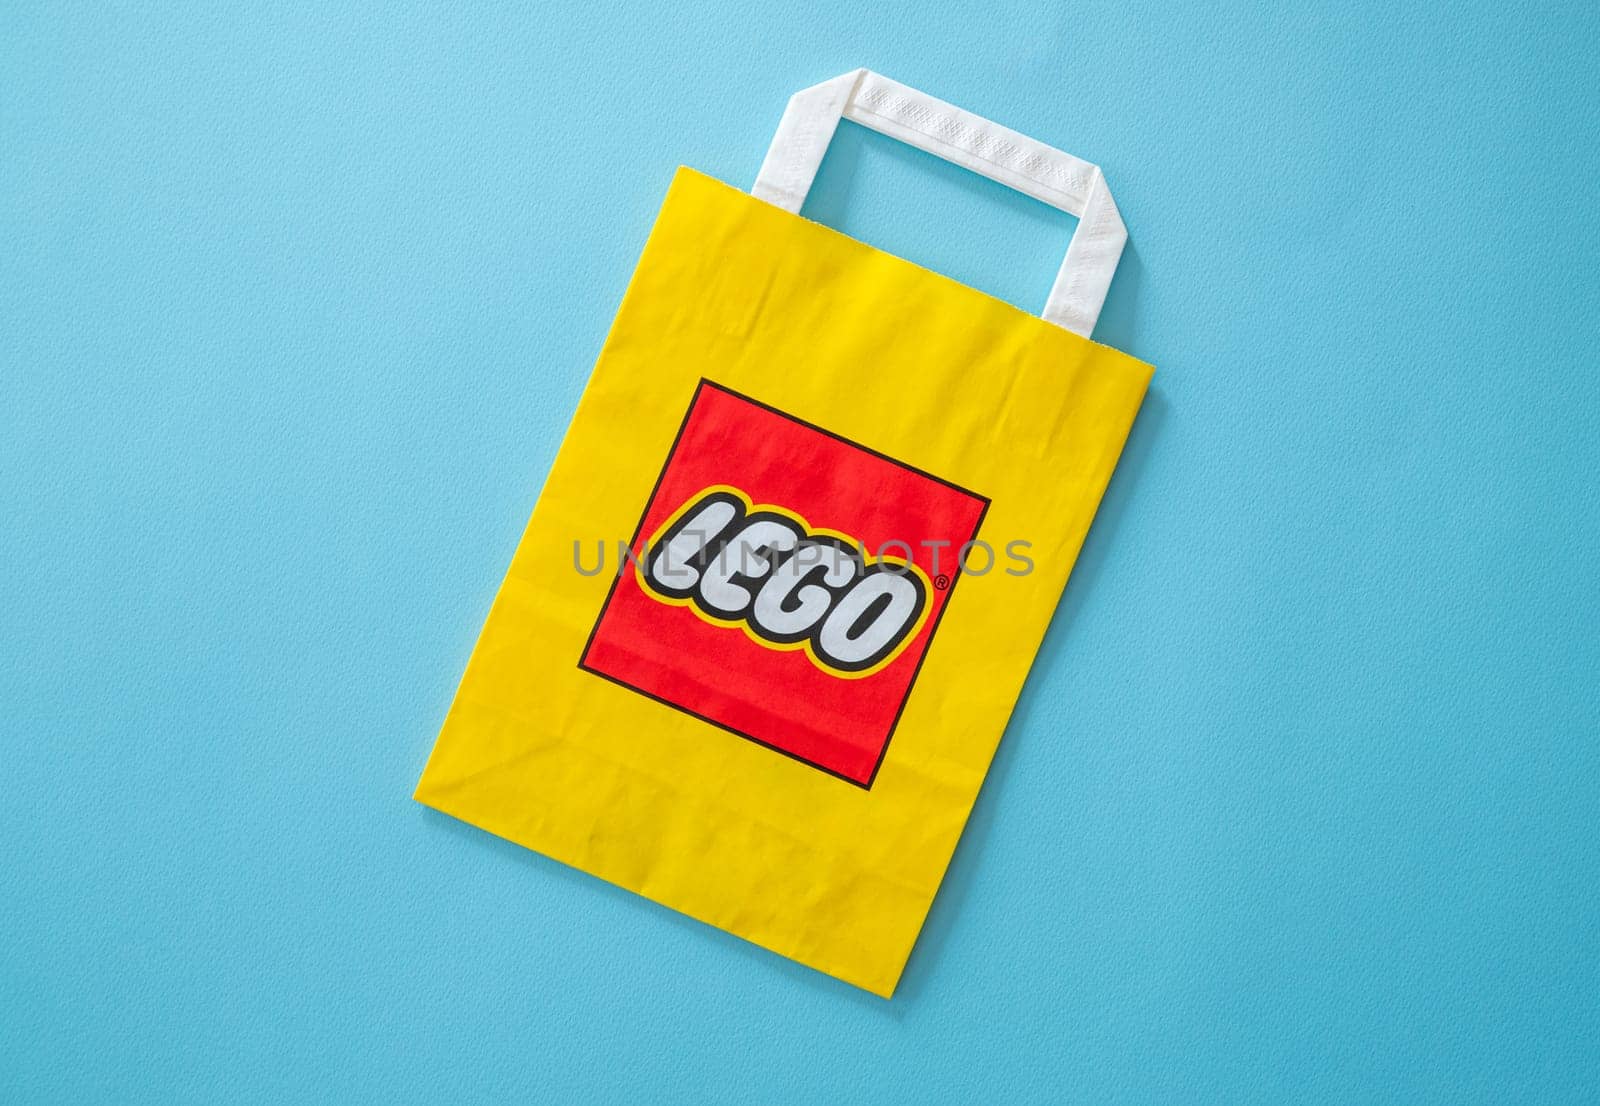 Antalya, Turkey - October 26, 2023: Branded yellow paper bag of Lego Group Corporation with logo